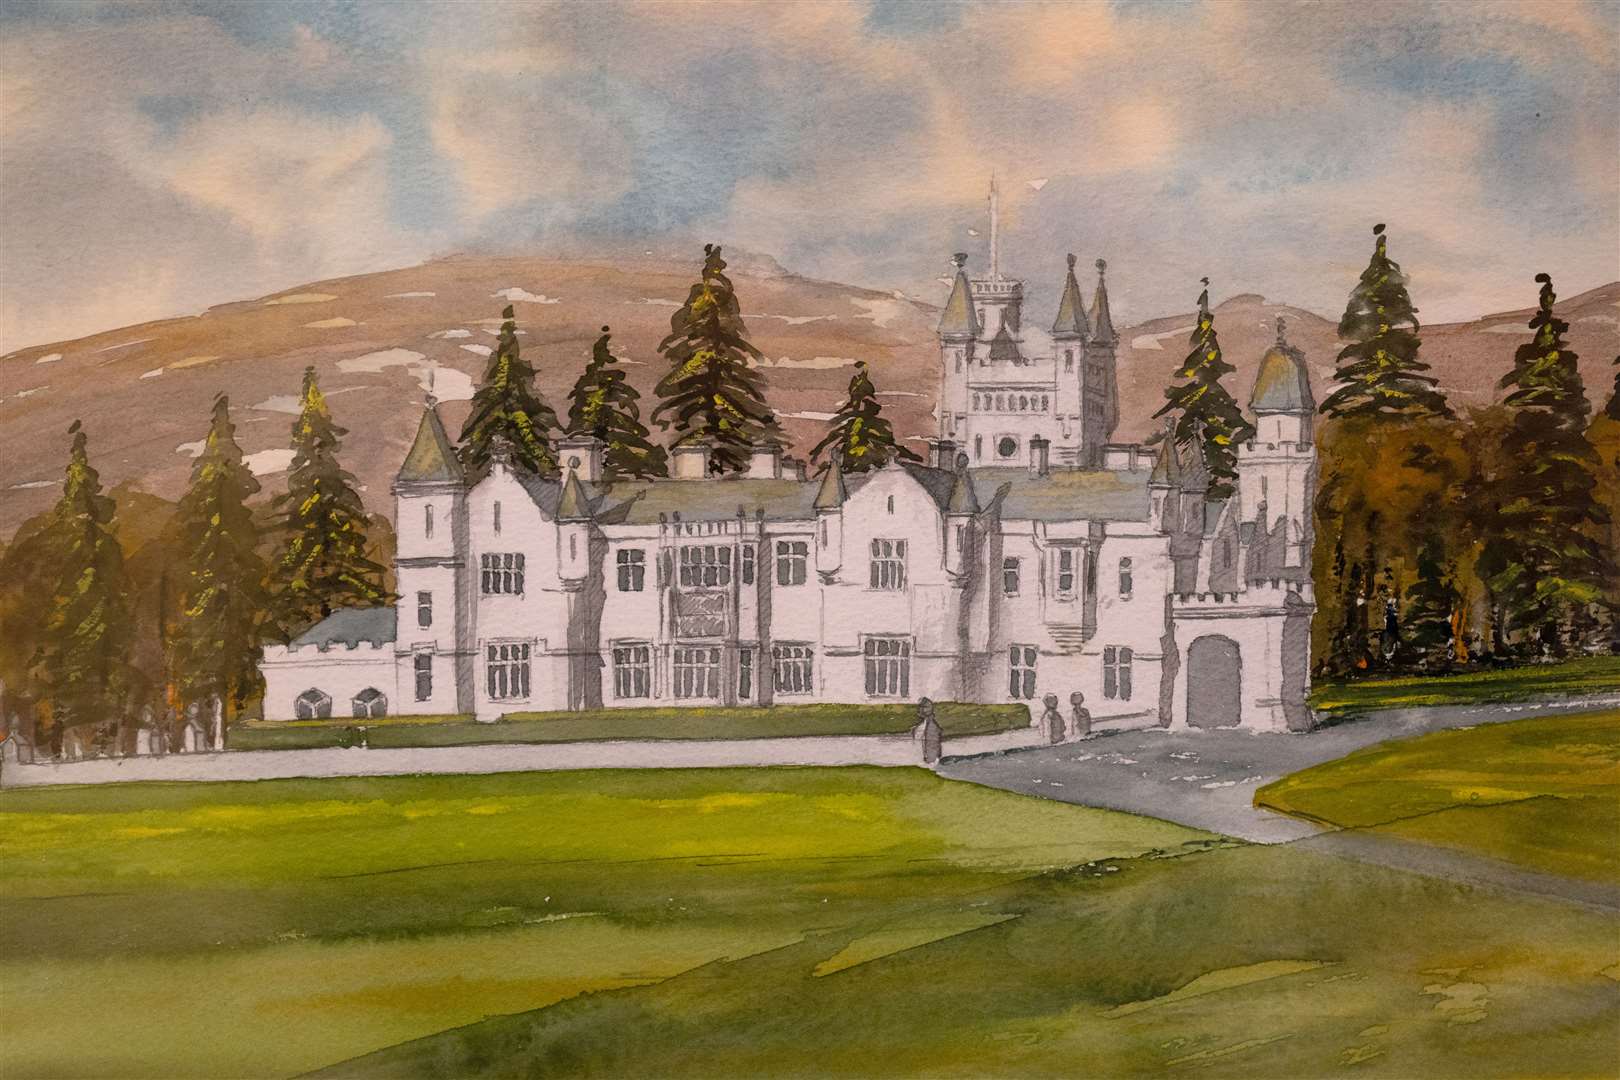 Balmoral Castle, Aberdeenshire (2001), a watercolour painted by the King (Joe Giddens/PA)